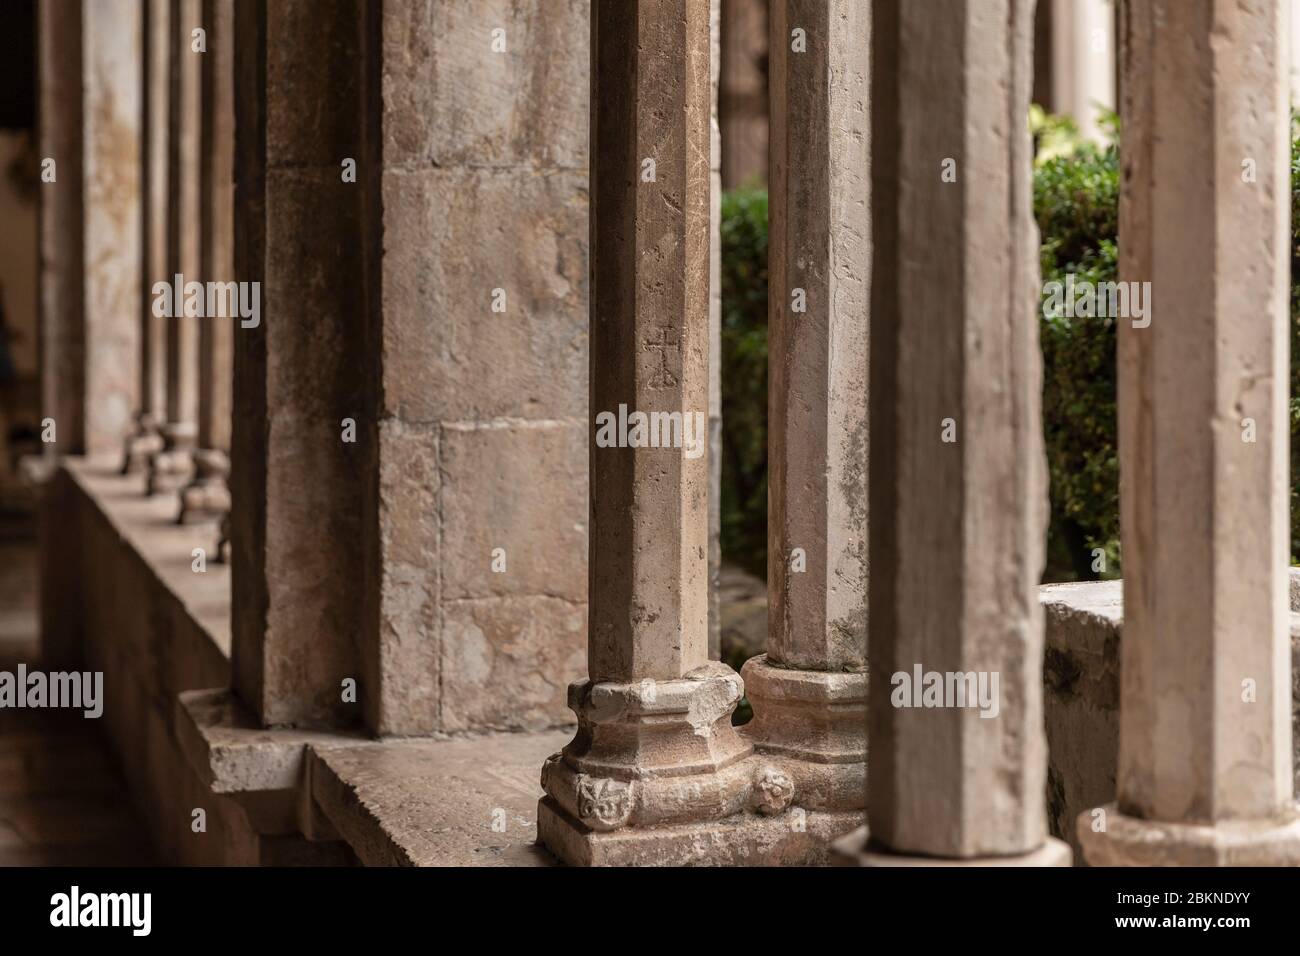 Decorative shaped columns with oranments in the 13th Century Franciscan Monastery cloister in the Old Town of Dubrovnik, Dalmatia, Croatia. Renaissanc Stock Photo